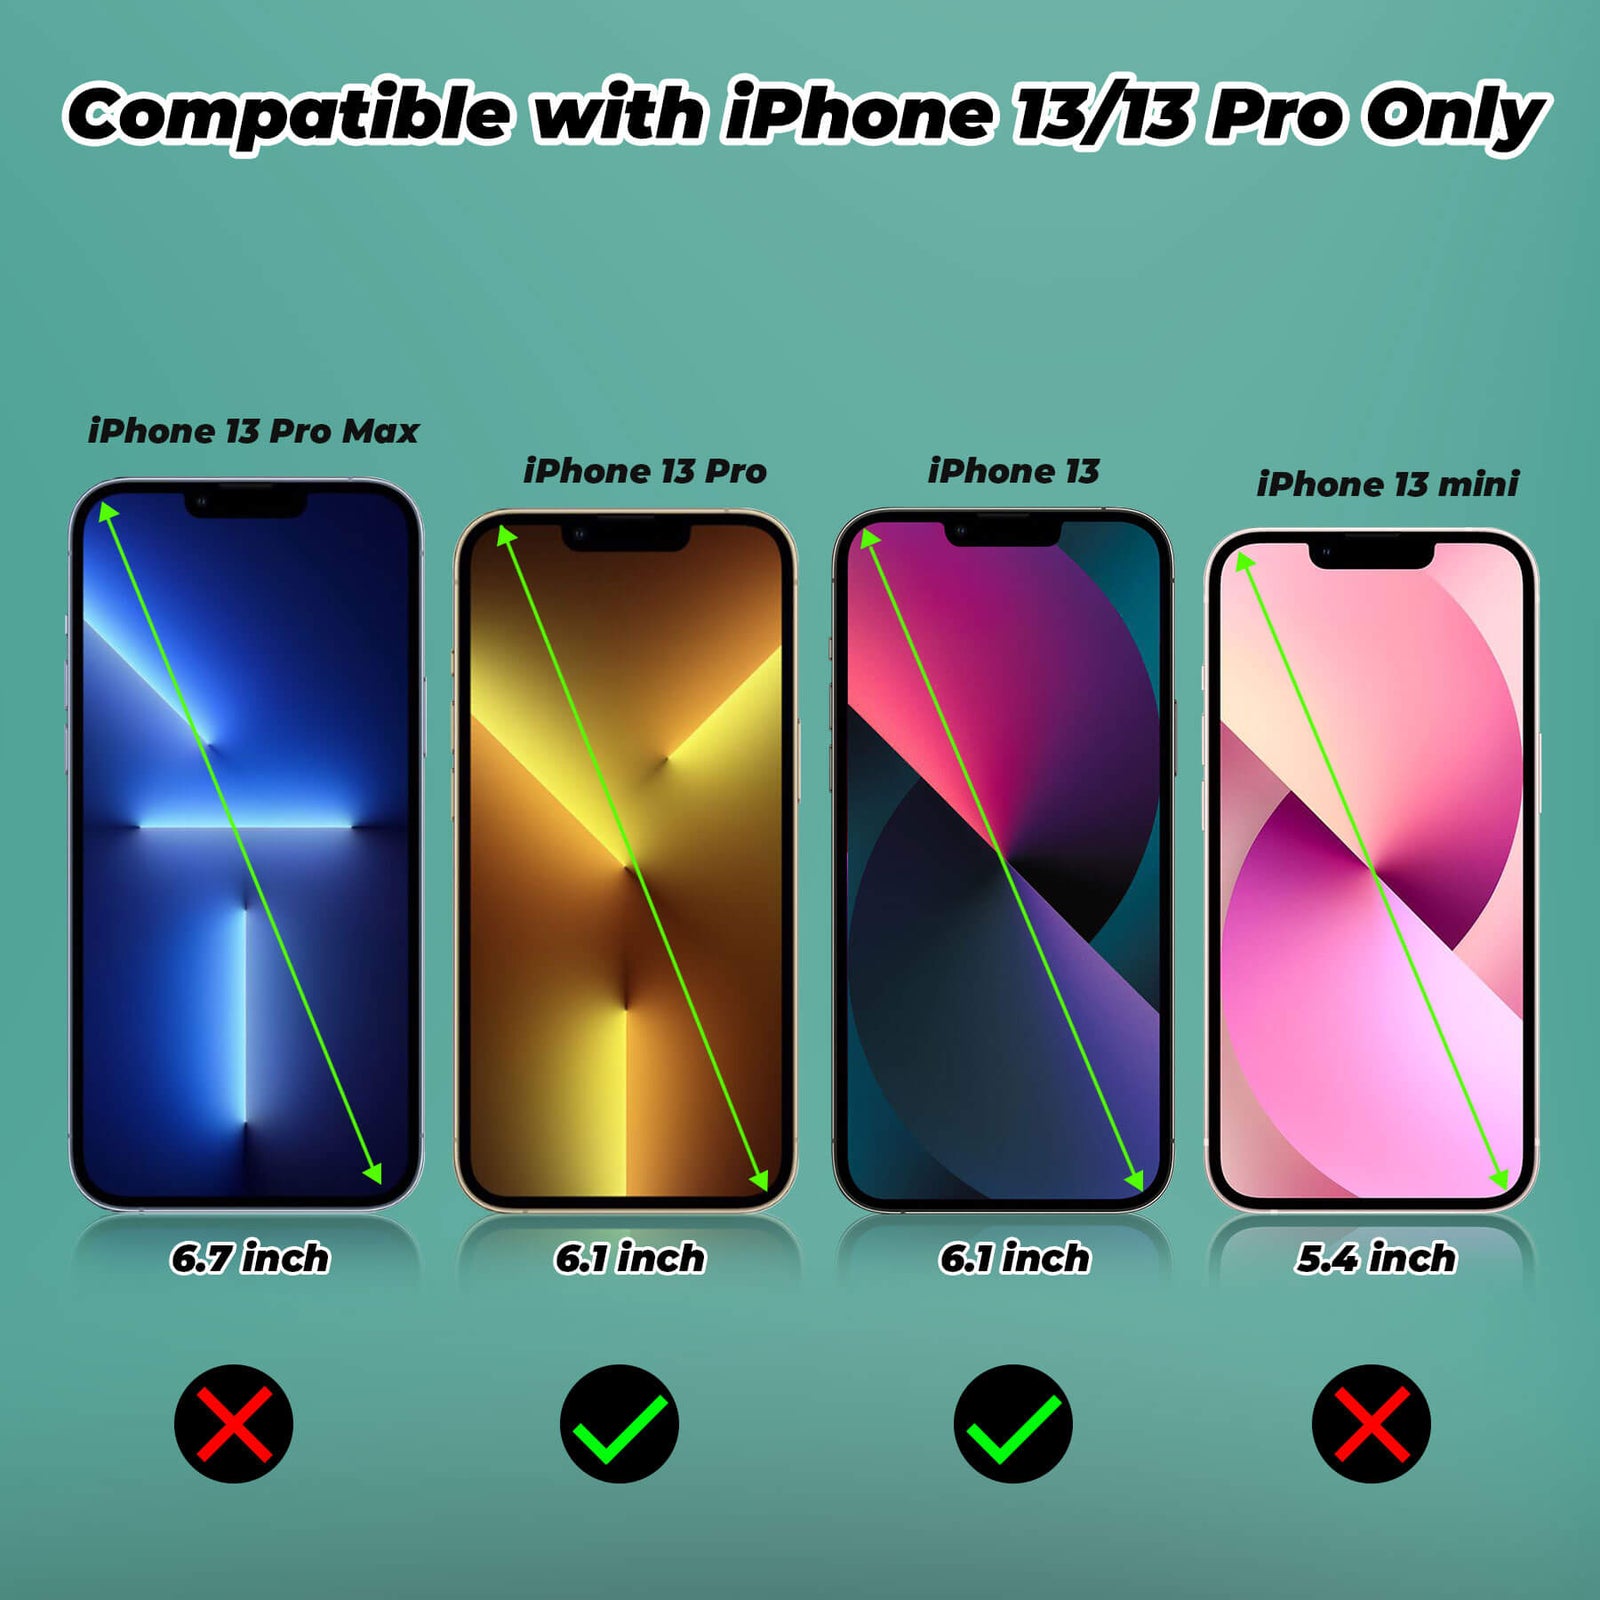 iPhone 13/13 Pro battery case, iPhone 13/13 Pro extended battery case, iPhone 13/13 Pro charging case, iPhone 13/13 Pro battery charger, TPU case, wireless charging, Apple, black